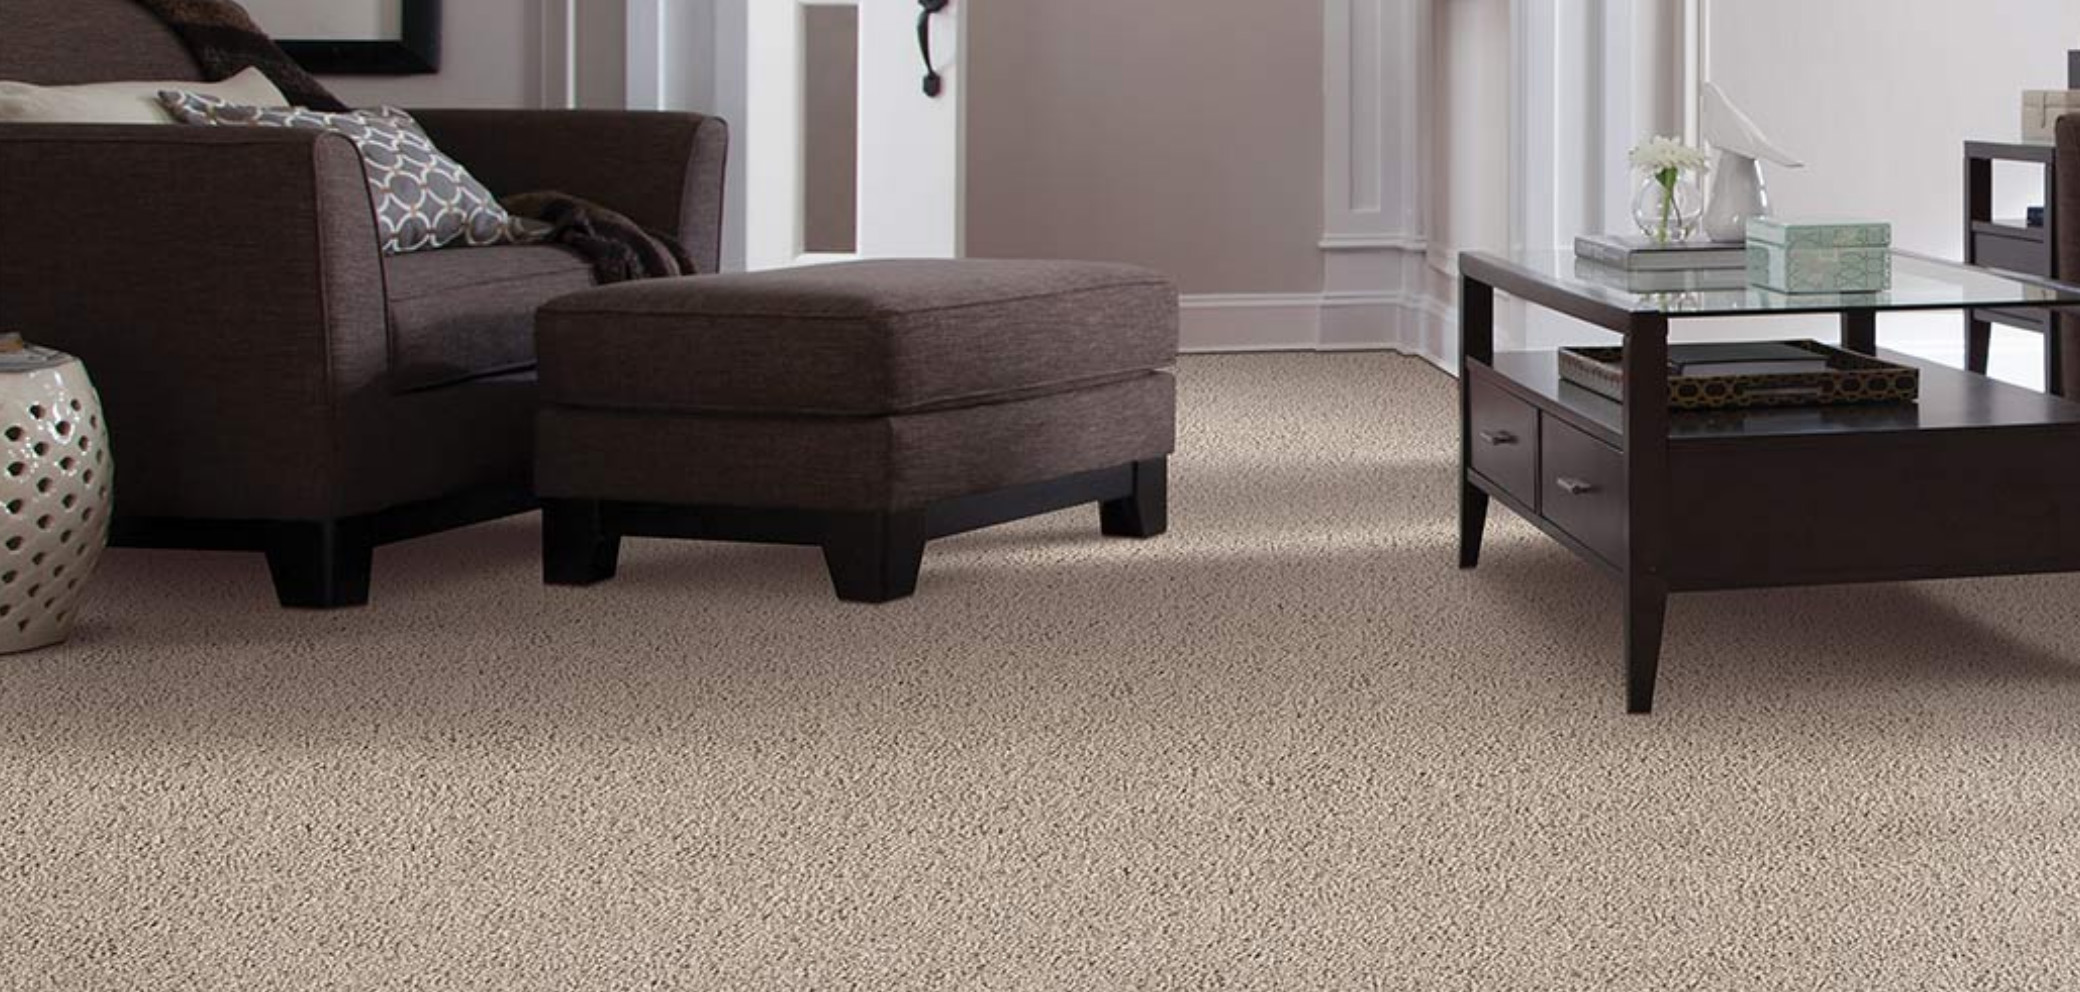 Wall-to-wall carpet vendors: Crossville Wholesale Carpet